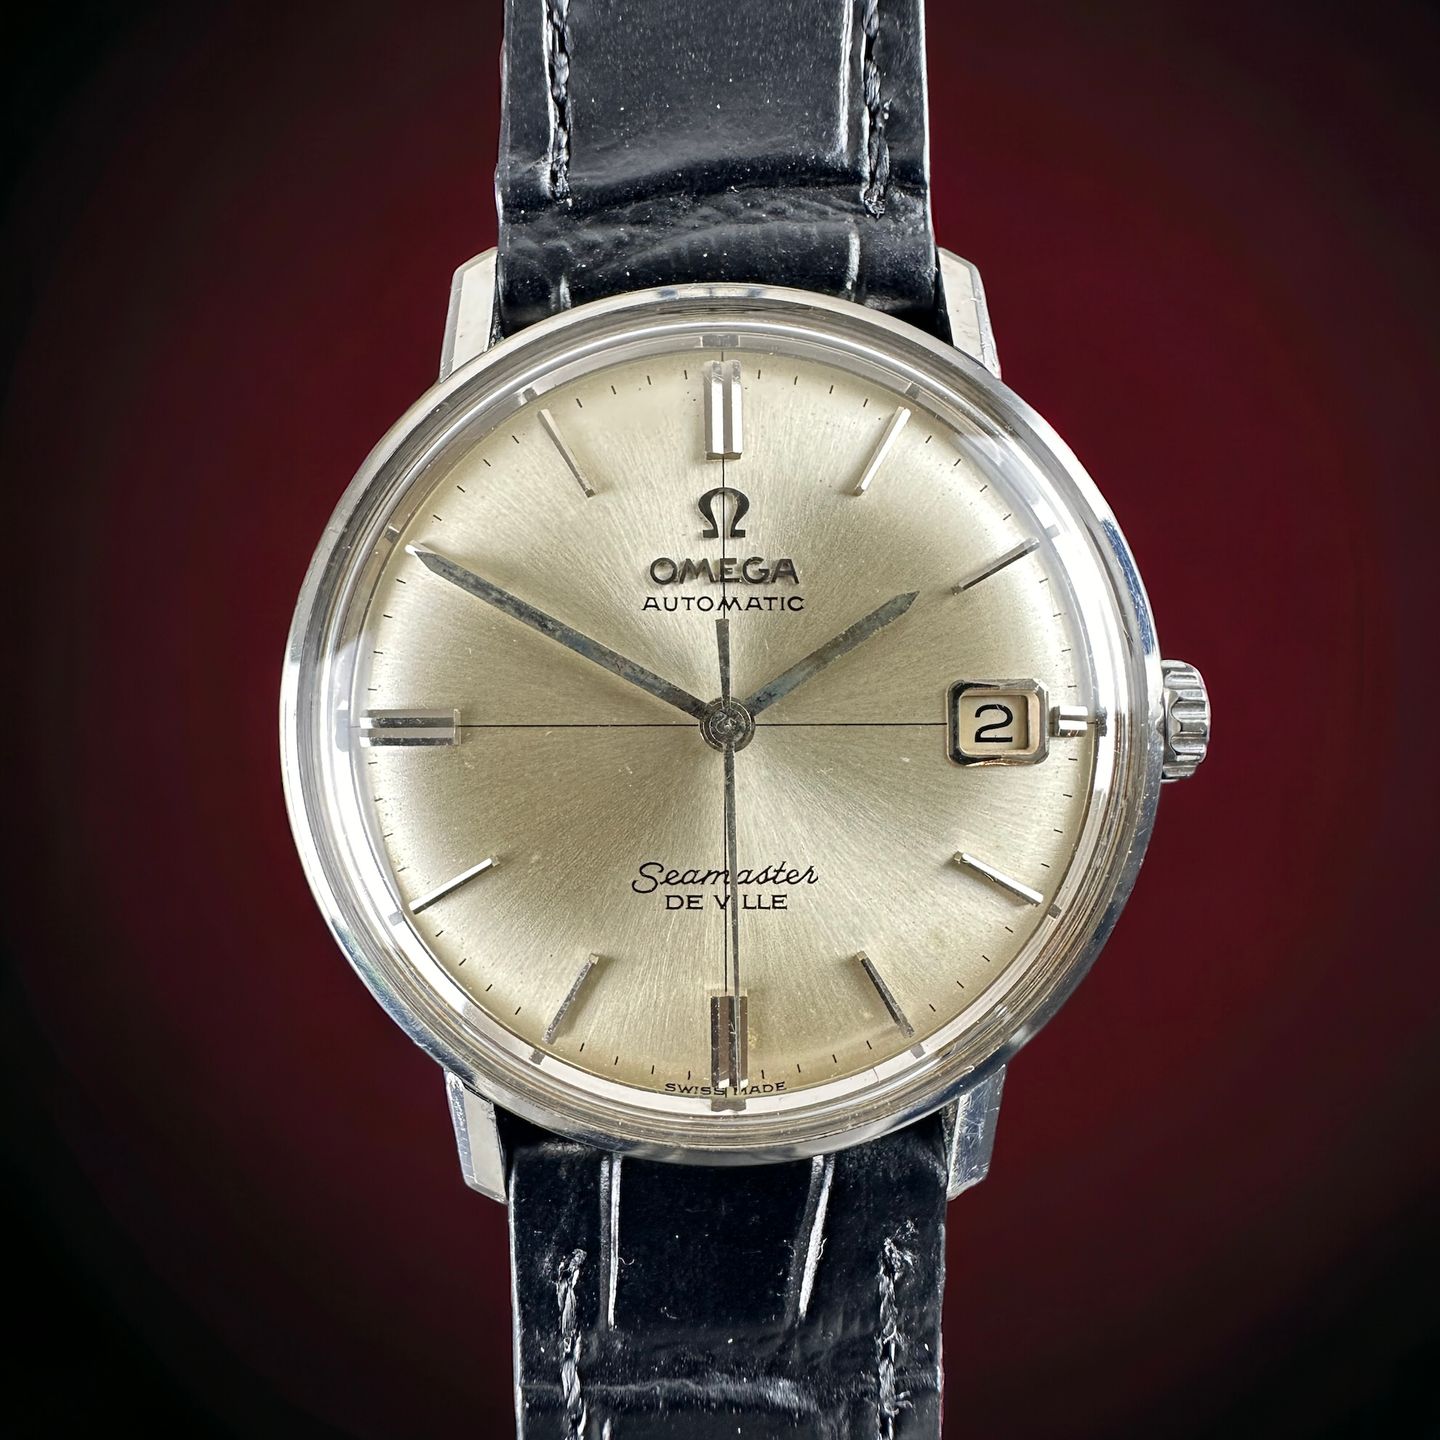 Omega Seamaster DeVille 166.020 (1966) - Wit wijzerplaat 34mm Staal (1/8)